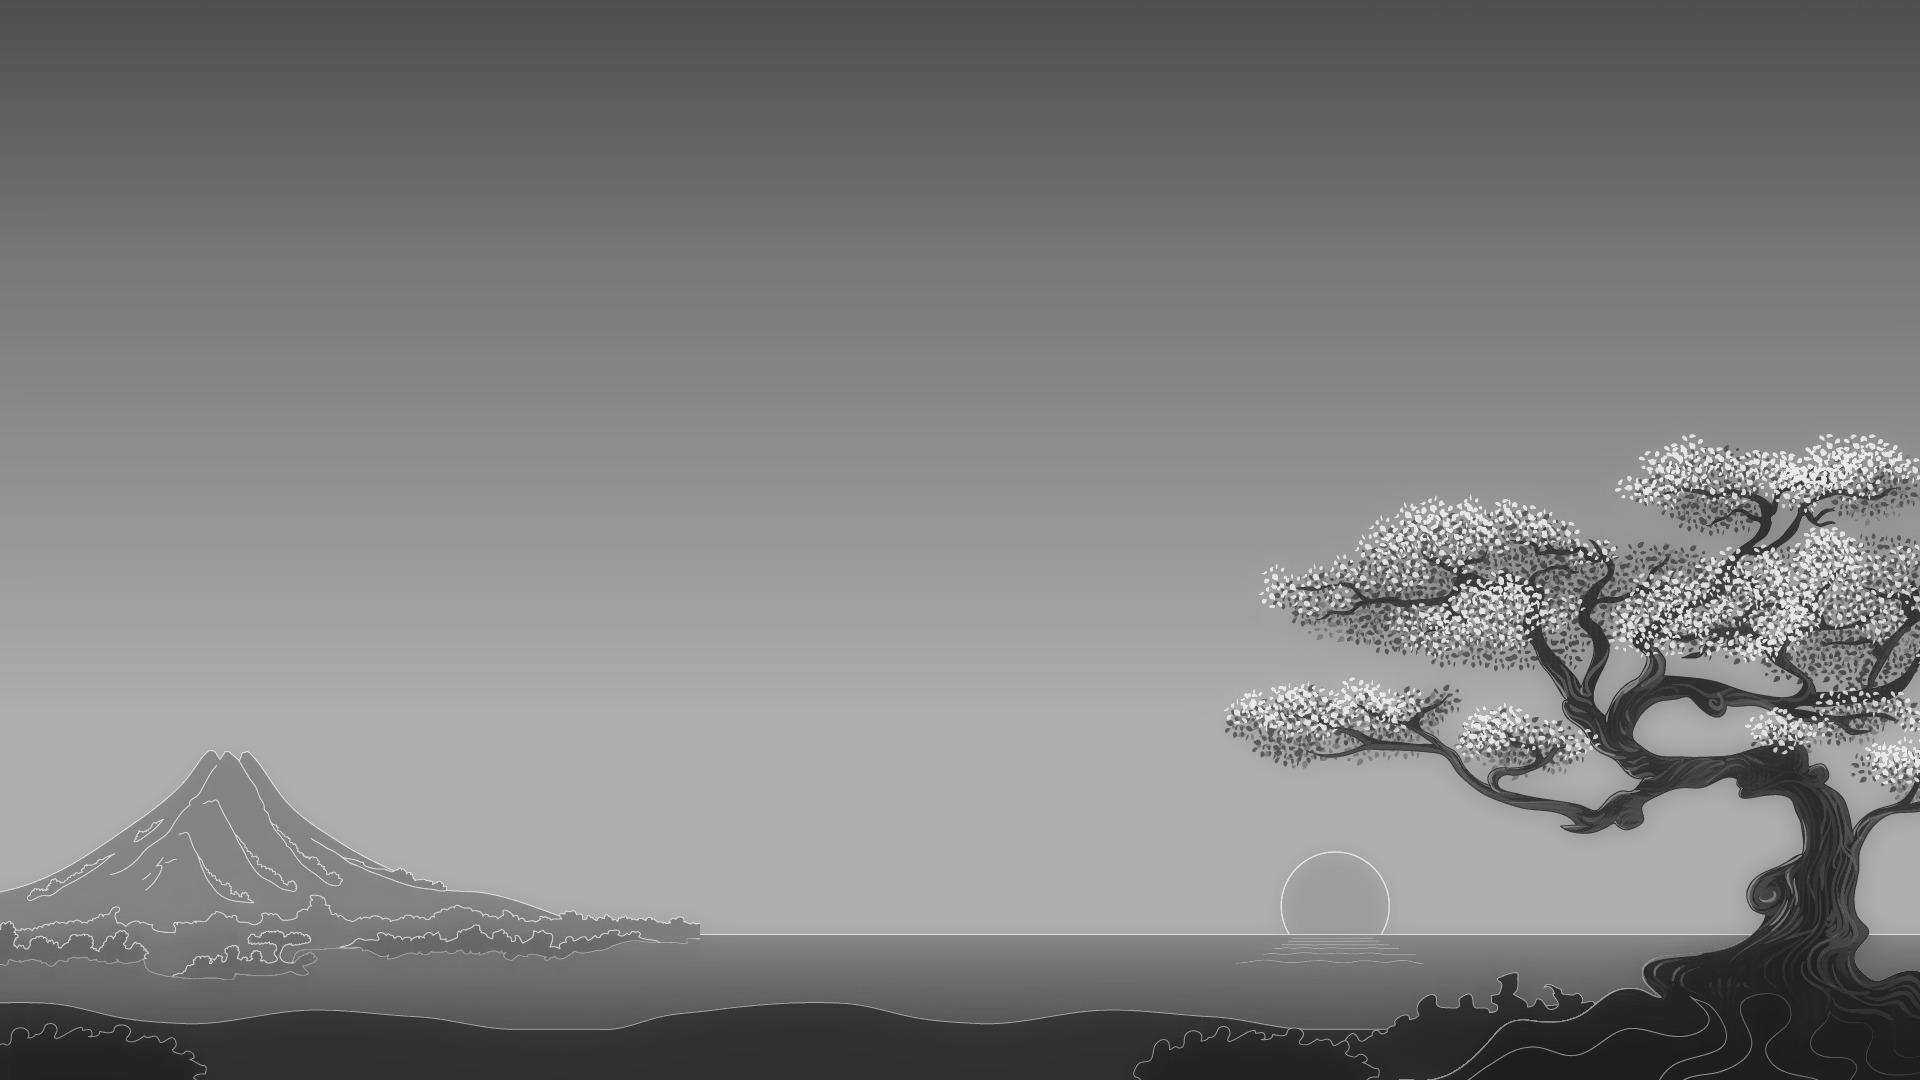 Black And White Japanese Wallpapers